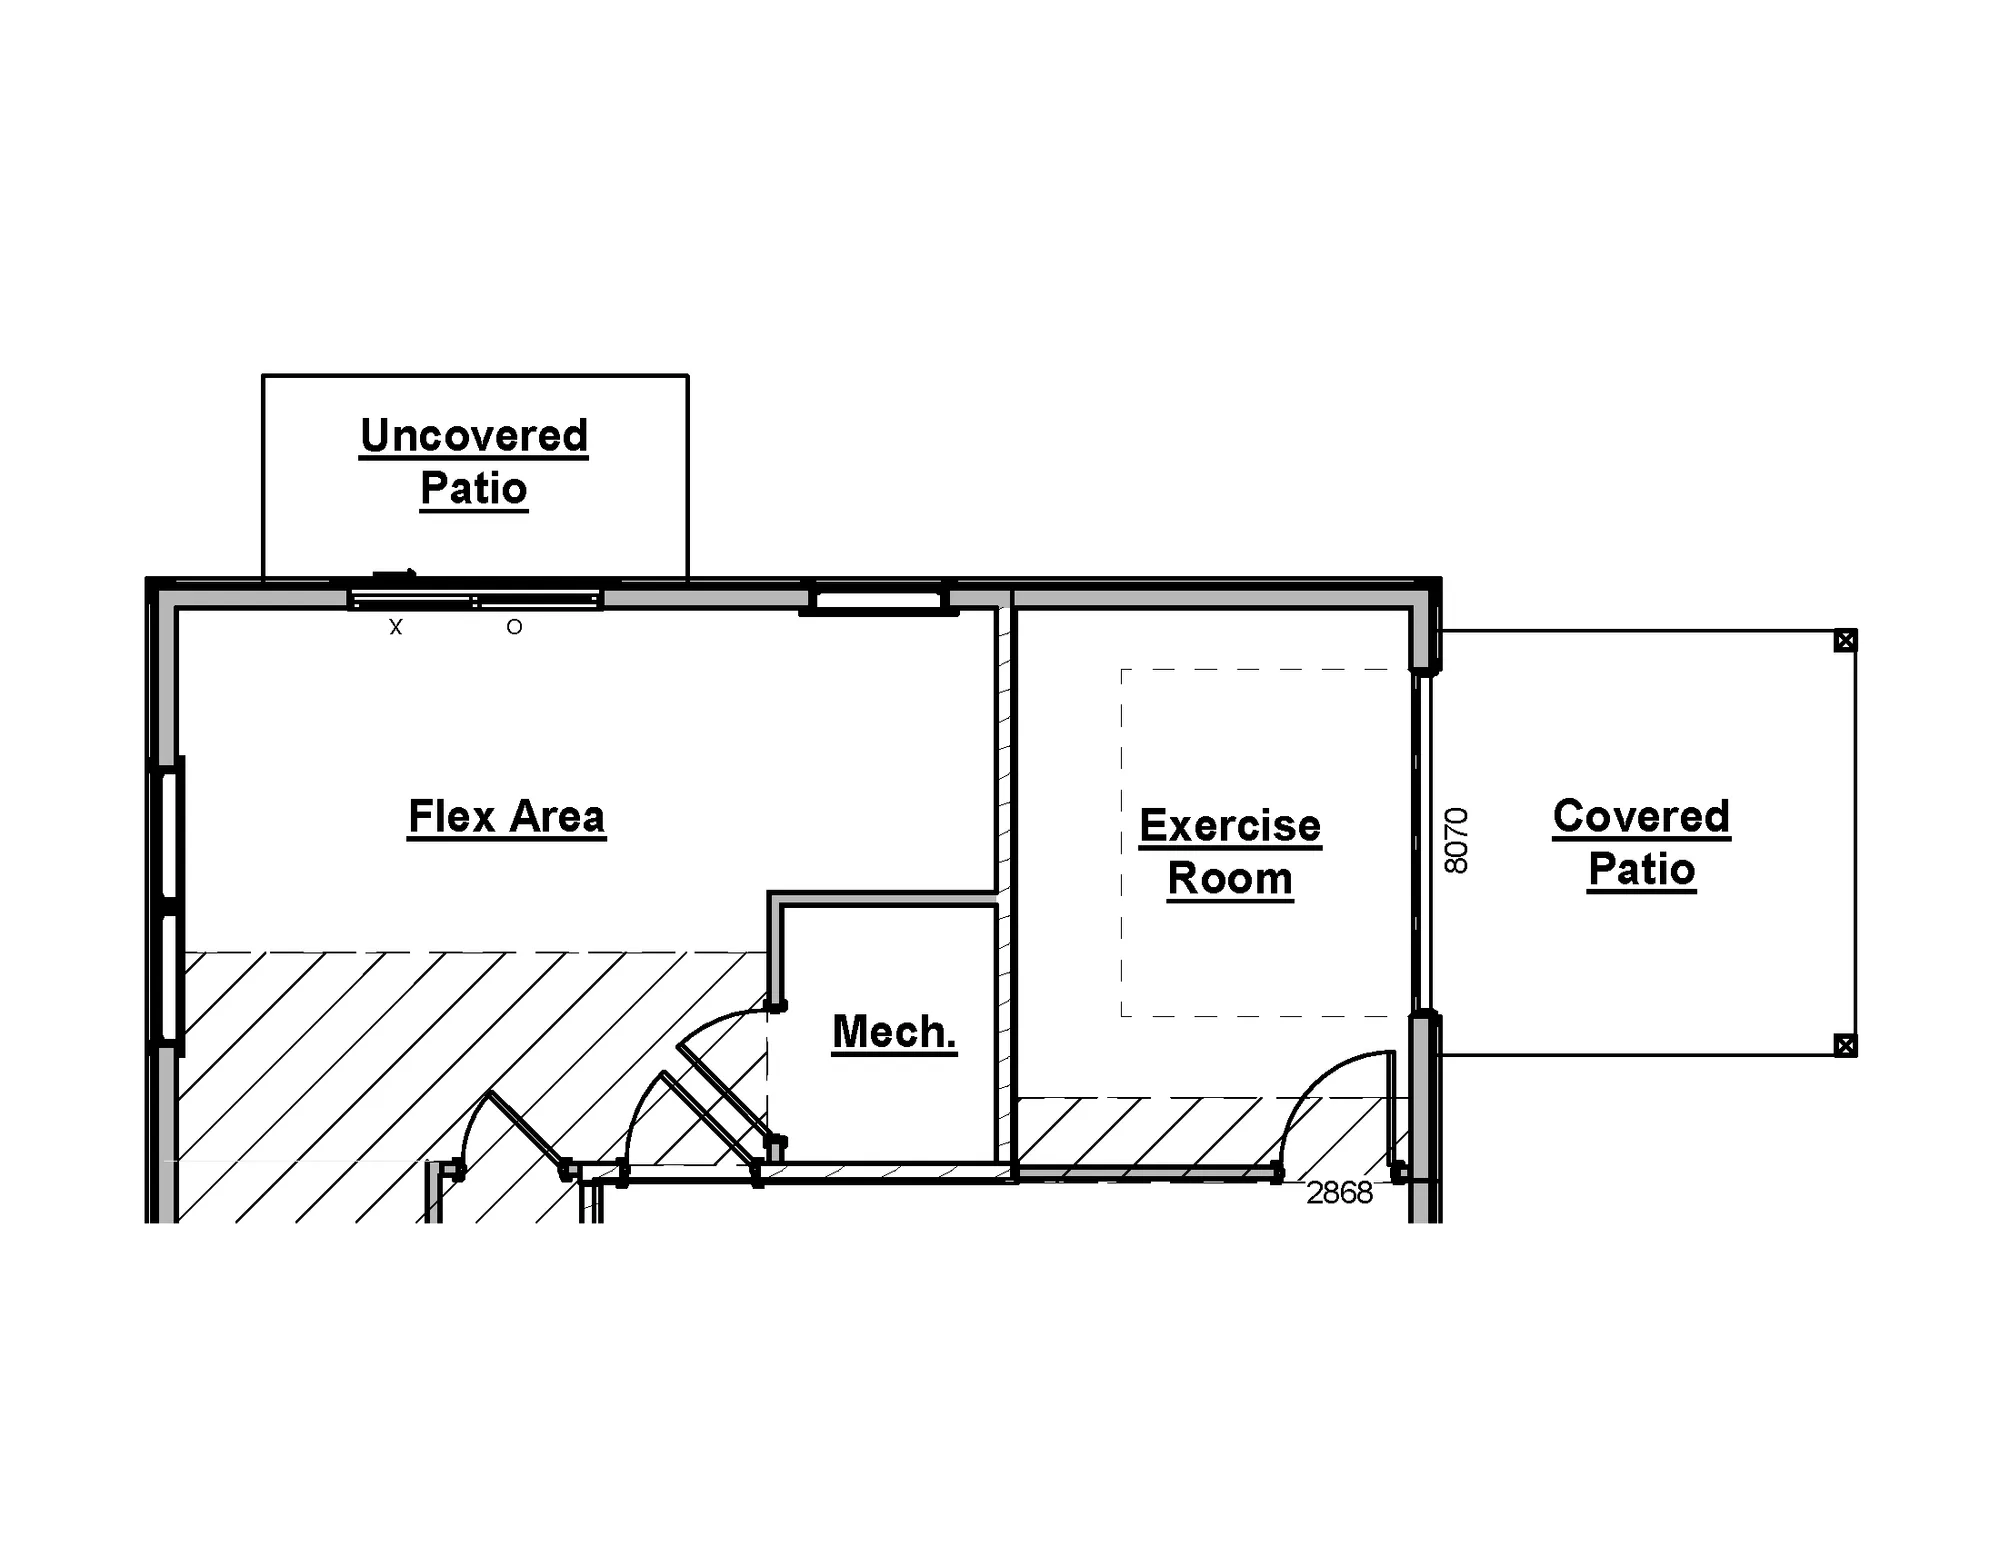 Exercise Room with Garage Door to Covered Patio Option - undefined